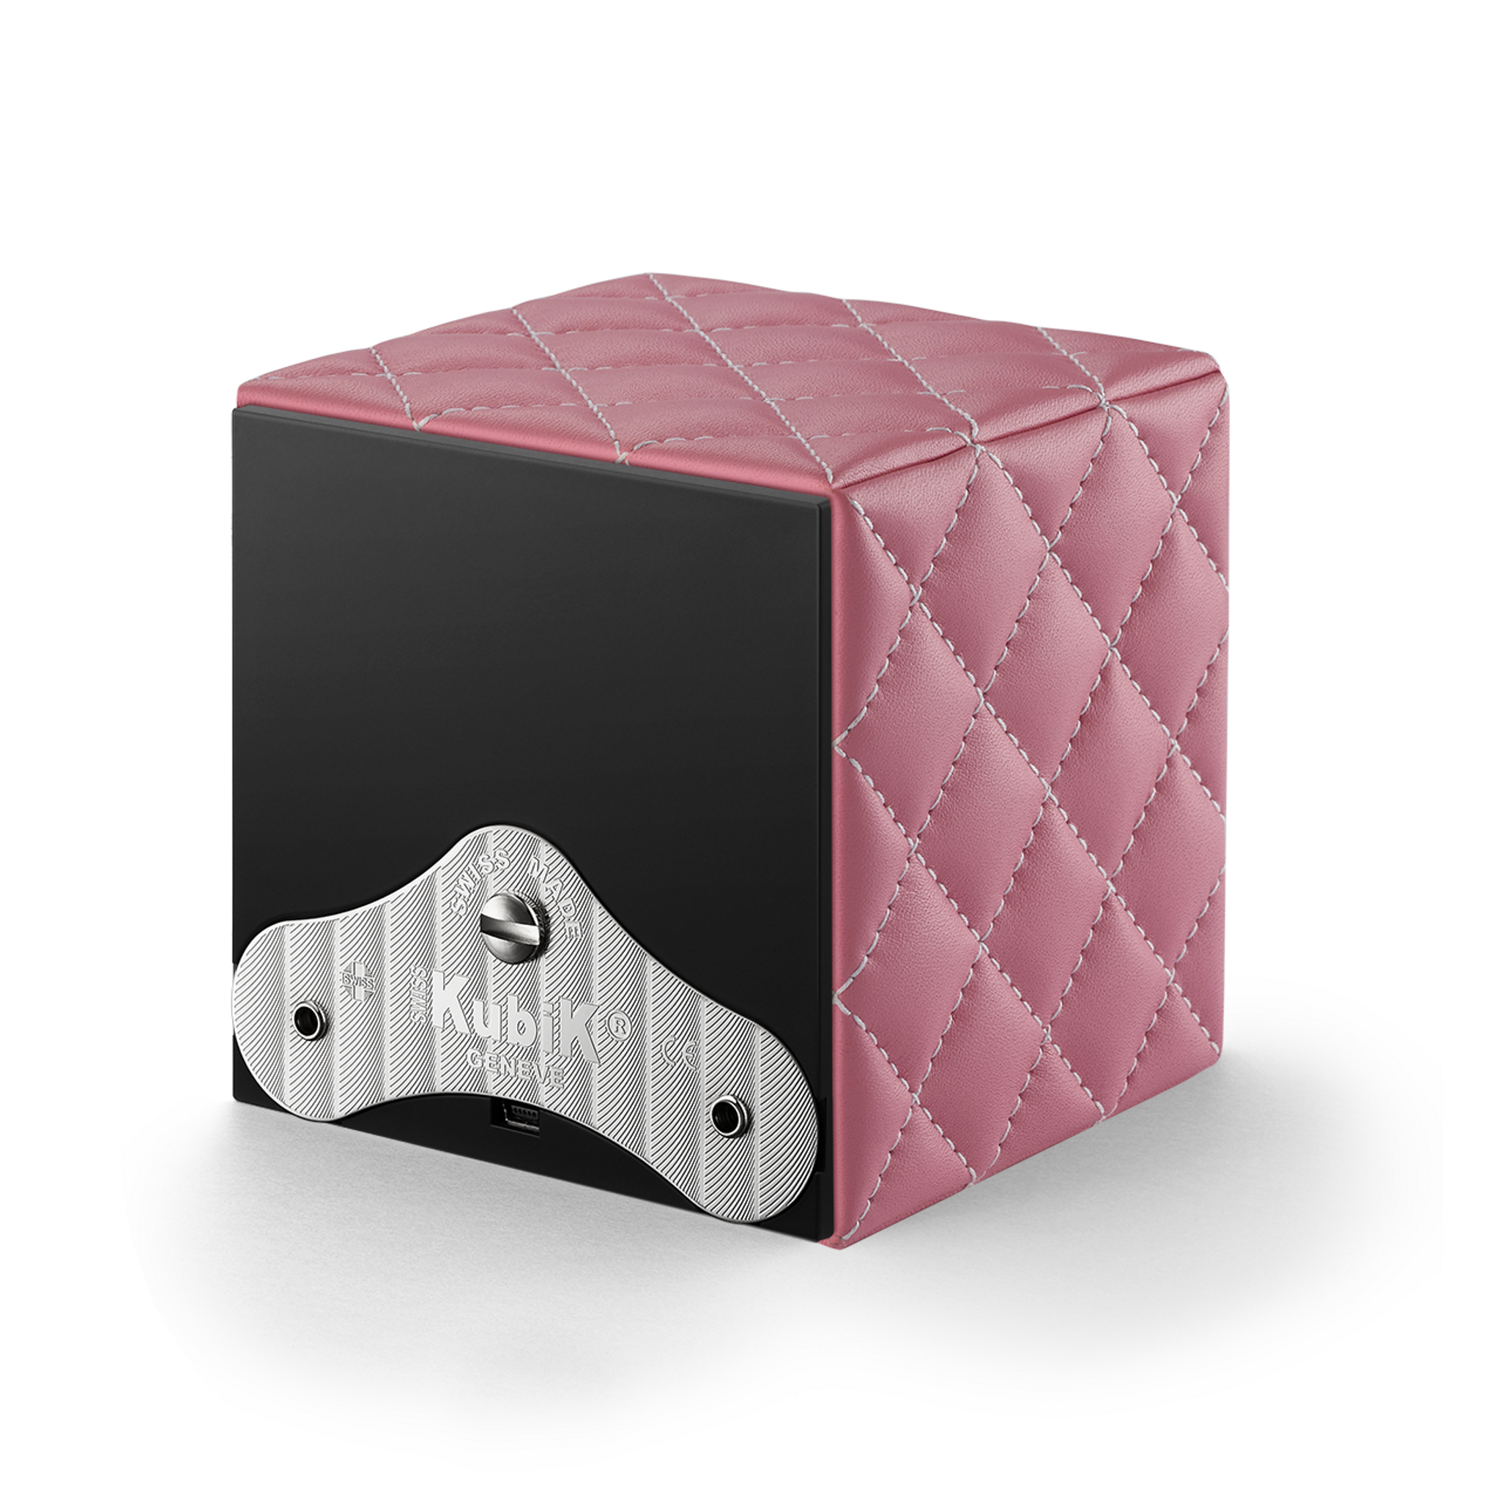 Swiss Kubik Masterbox Couture rose avec couture blanche